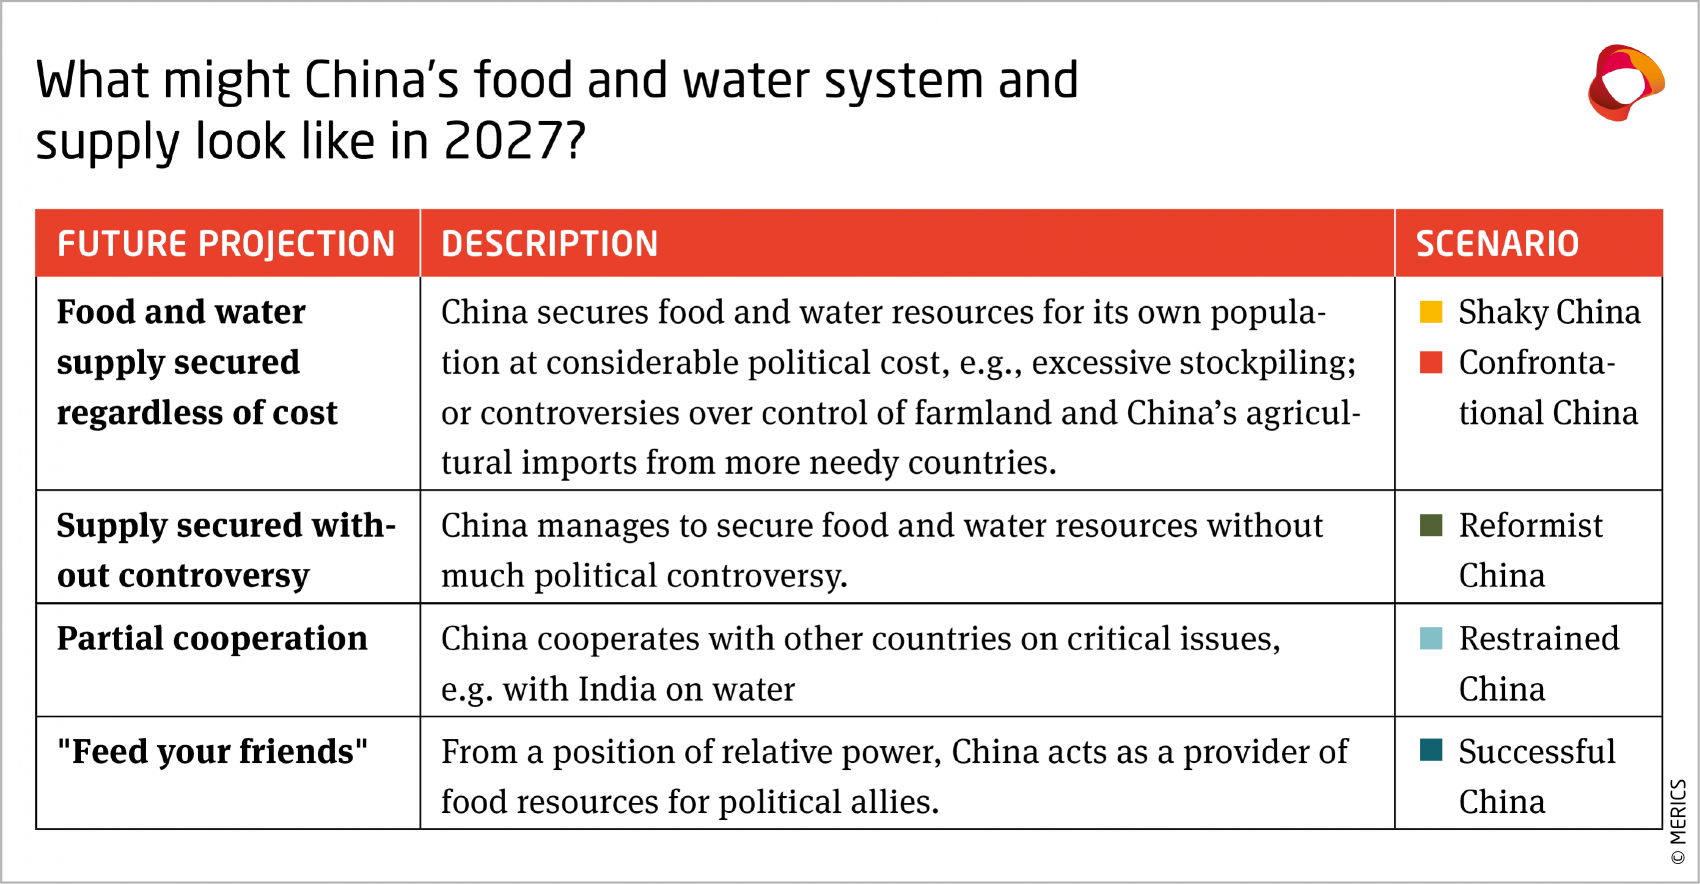 China's food and water systems in 2027